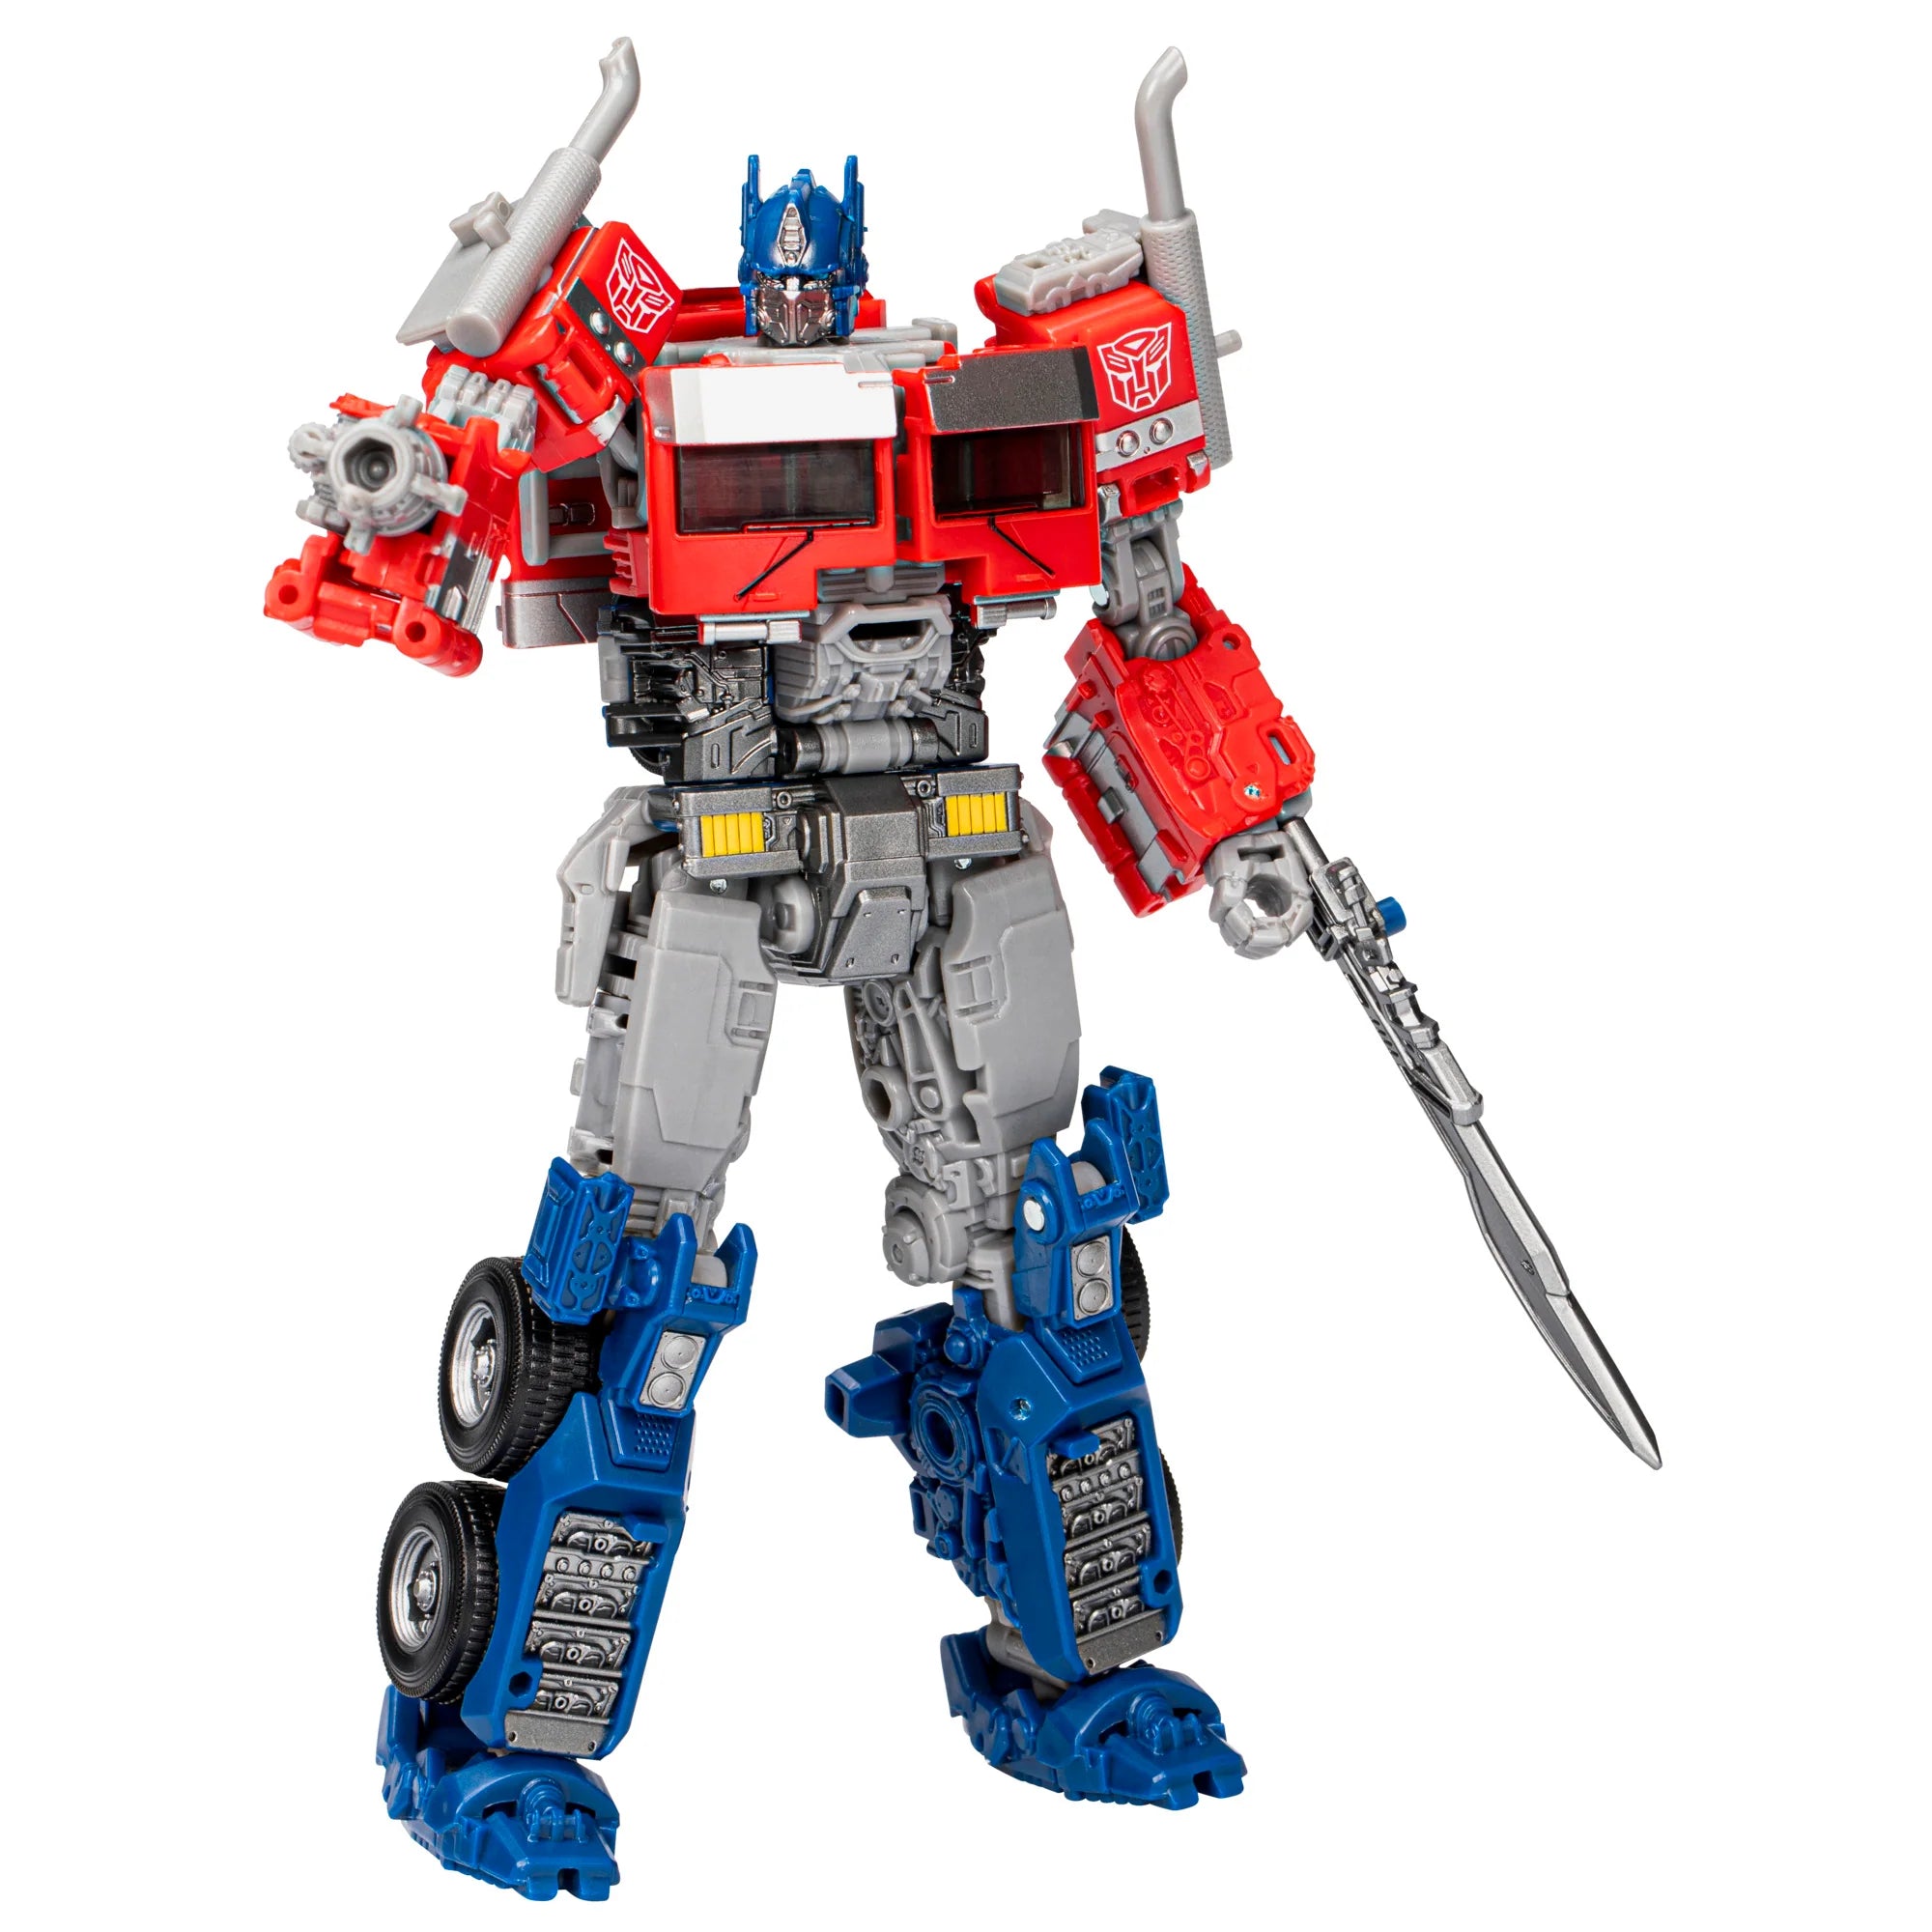 Transformers Studio Series Buzzworthy Bumblebee #102 Rise of the Beast Optimus Prime Action Figure